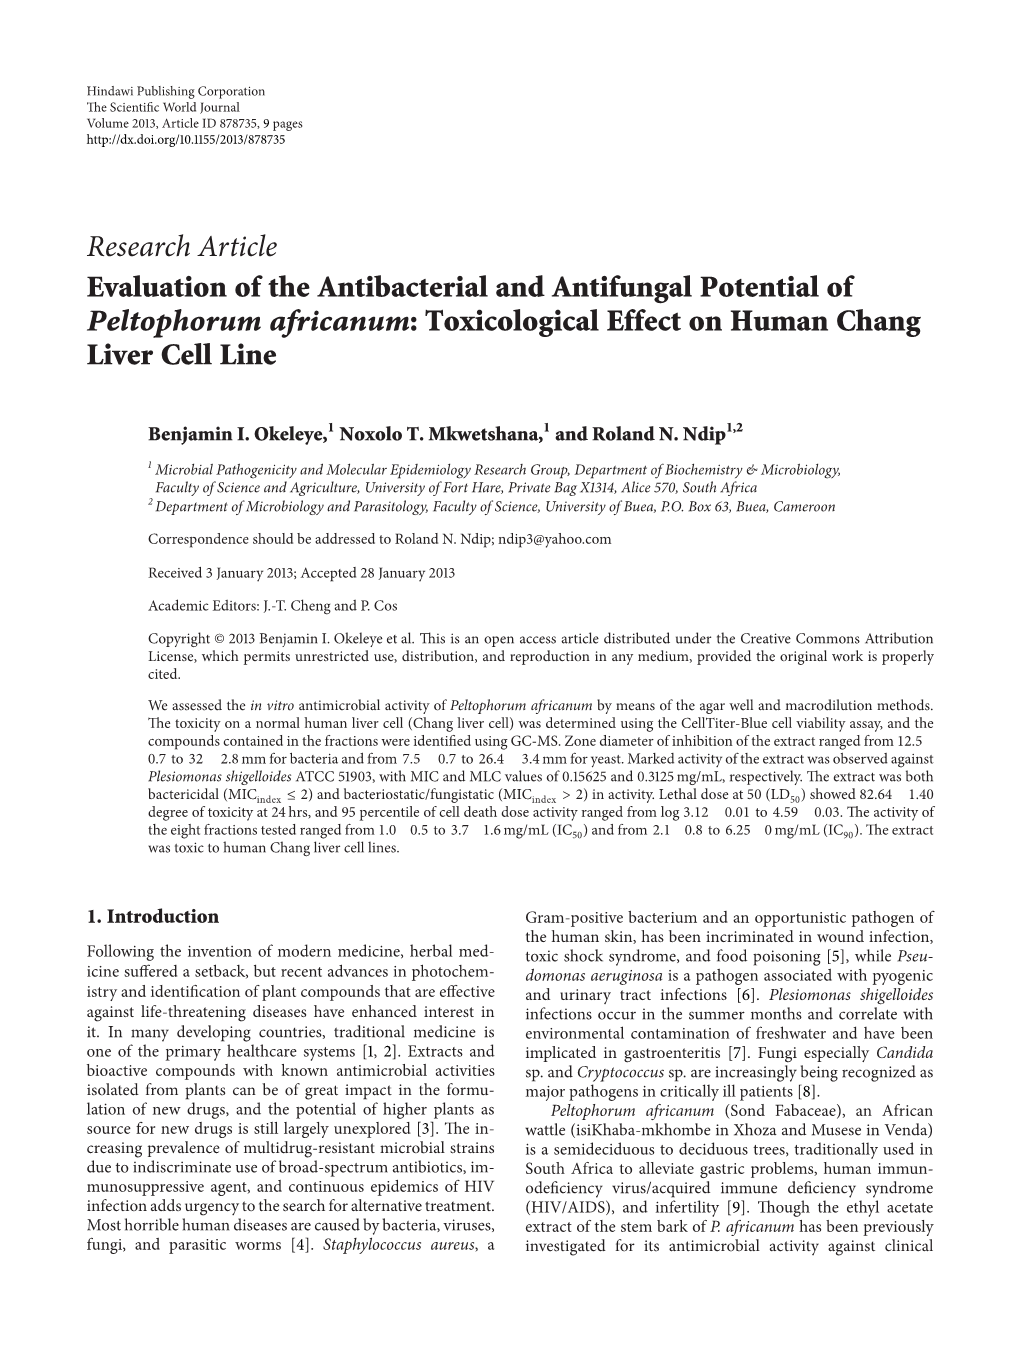 Evaluation of the Antibacterial and Antifungal Potential of Peltophorum Africanum: Toxicological Effect on Human Chang Liver Cell Line